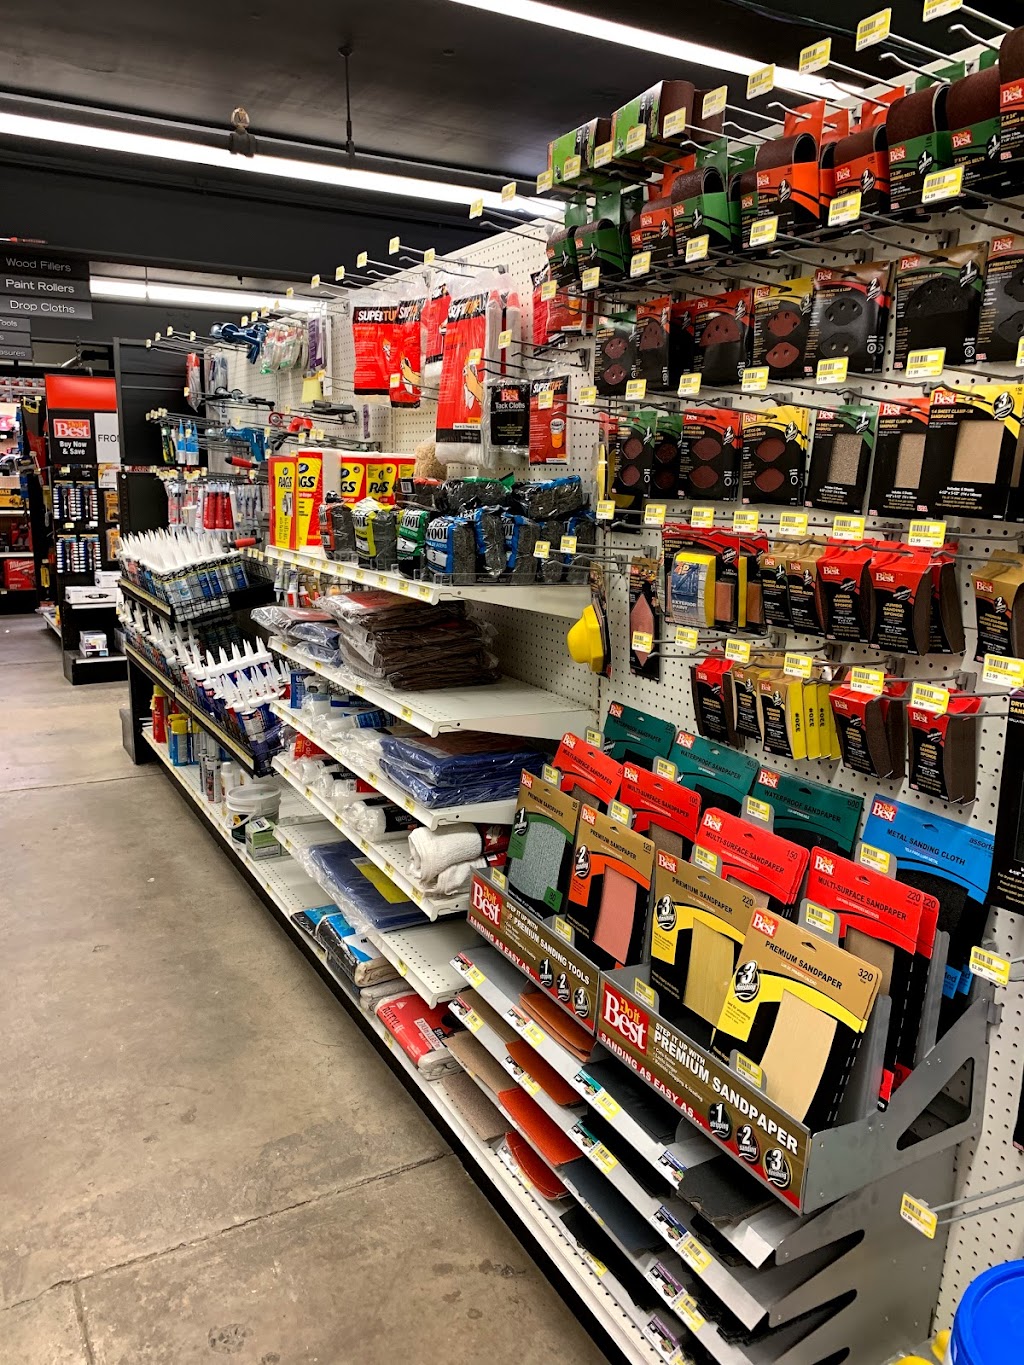 Ackers Hardware | Around back of shopping center, 400 Huntingdon Pike, Rockledge, PA 19046 | Phone: (215) 379-4646